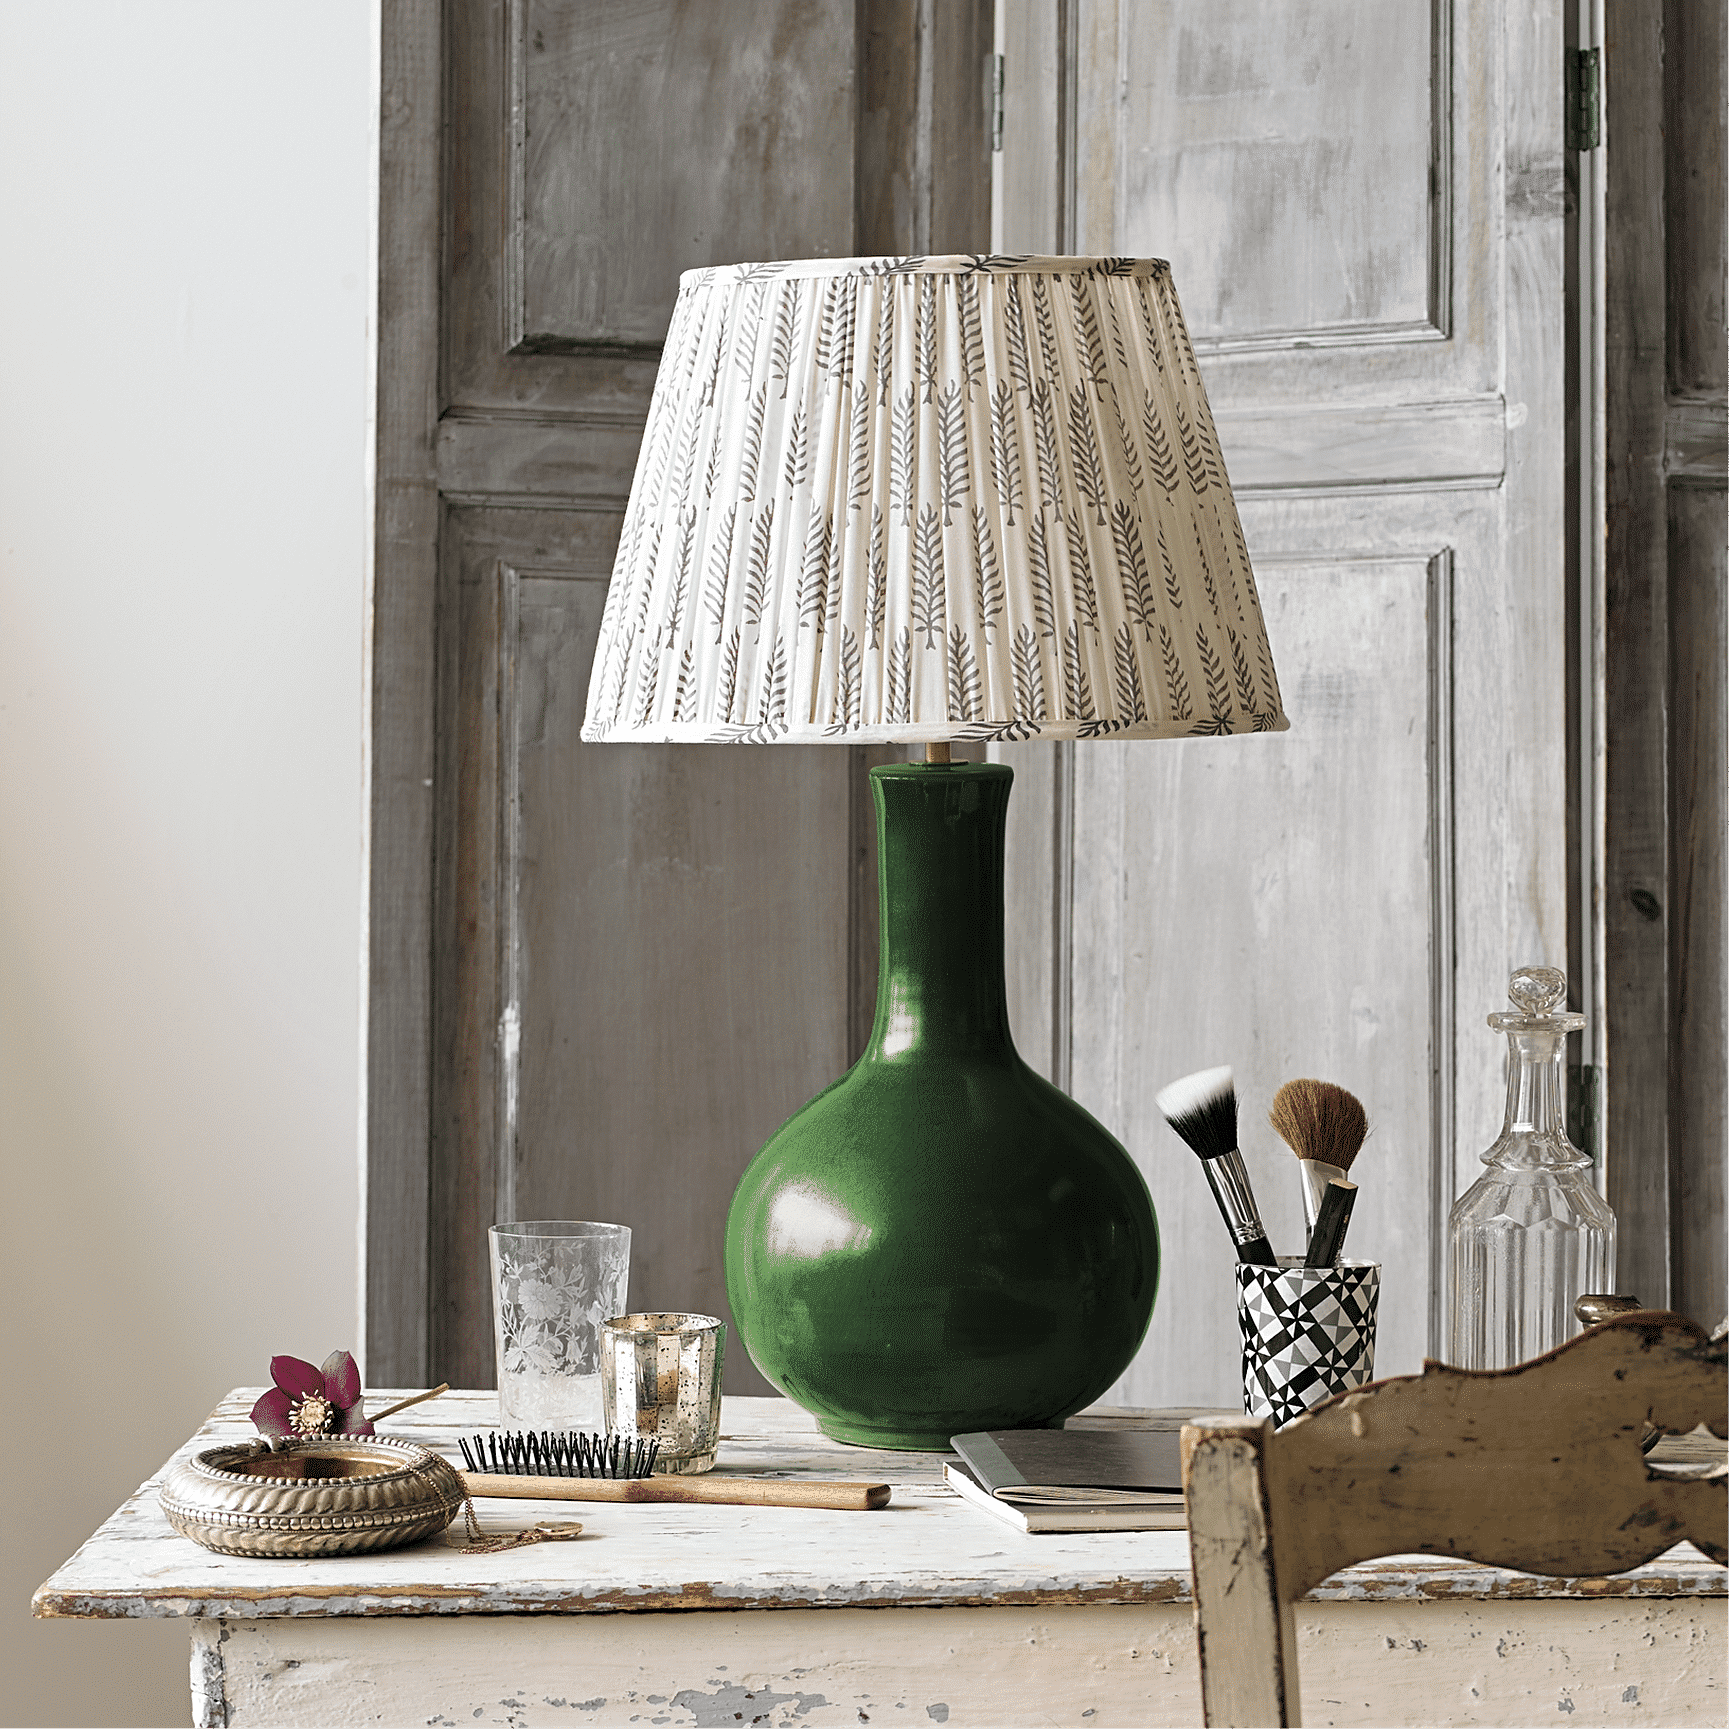 Pooky nellie table lamp in a green glaze - No.42 Interiors